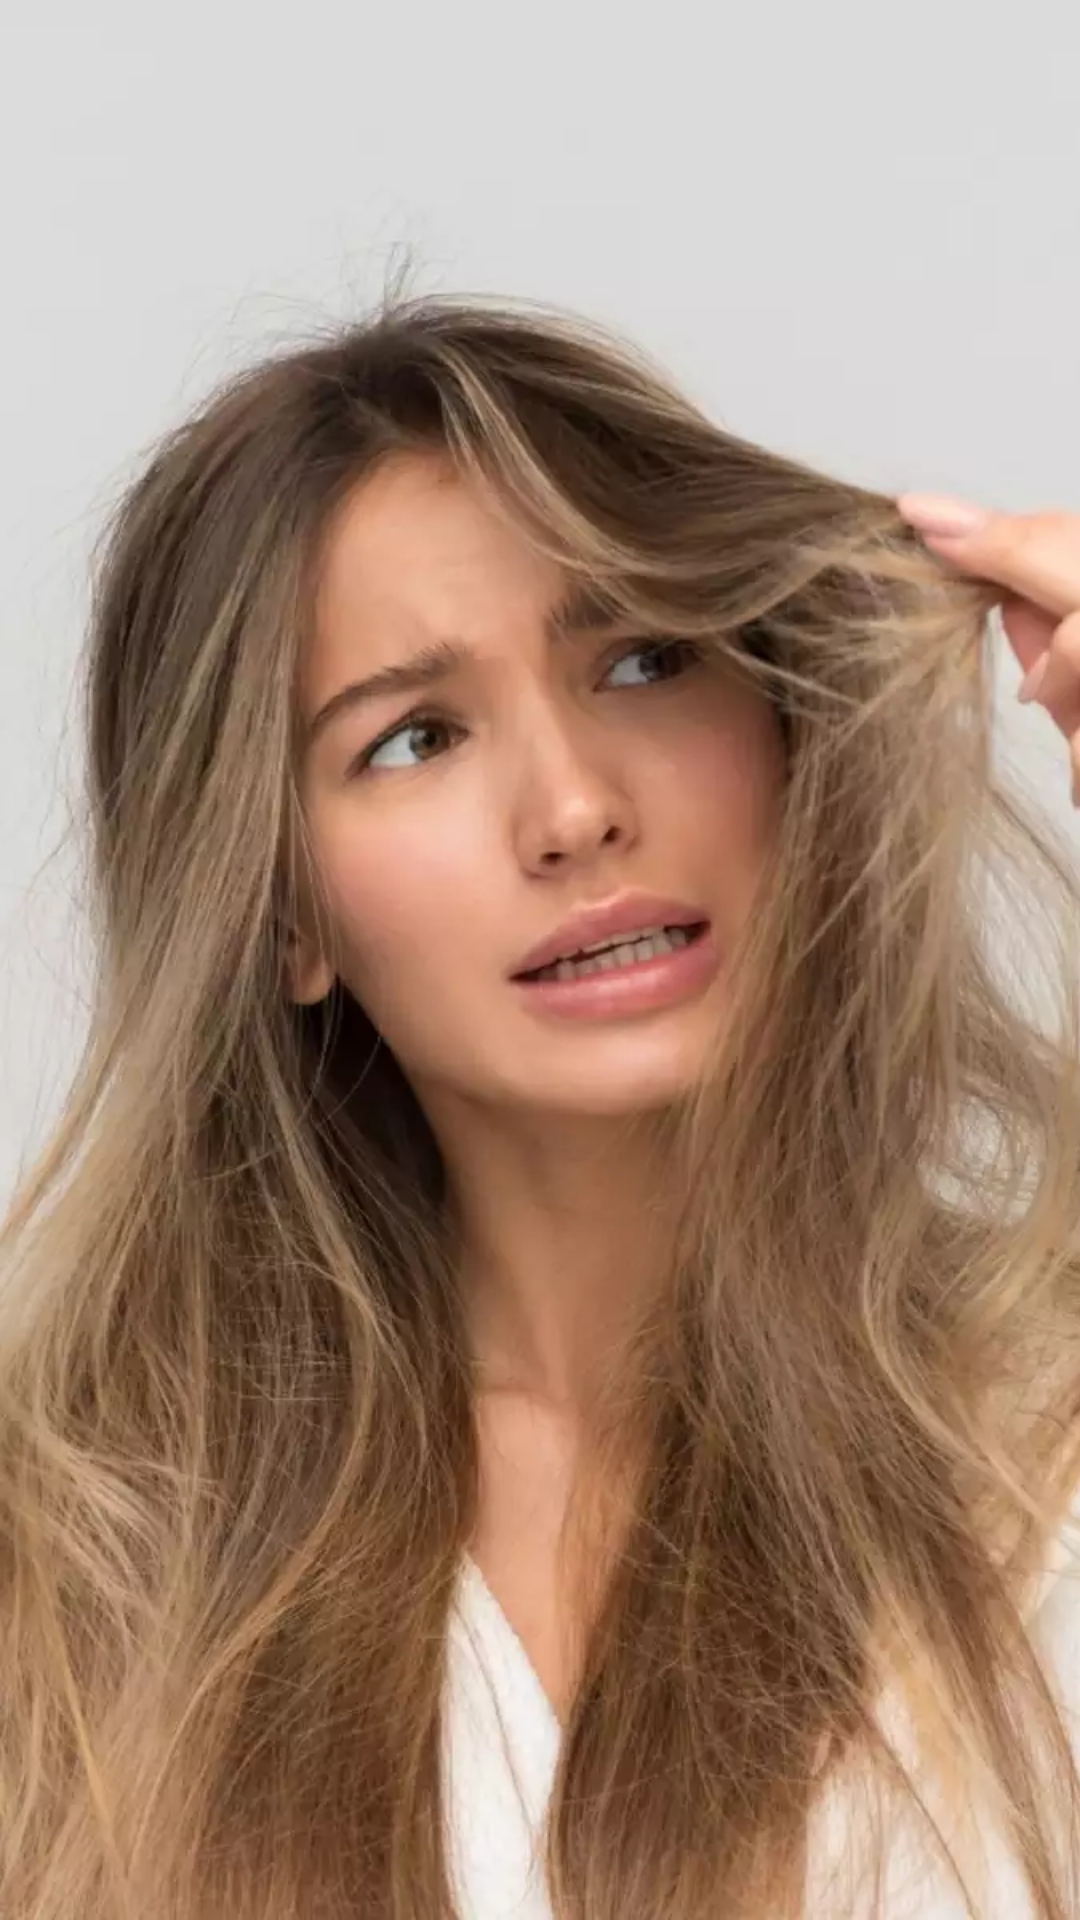 5 effective home remedies for dry hair